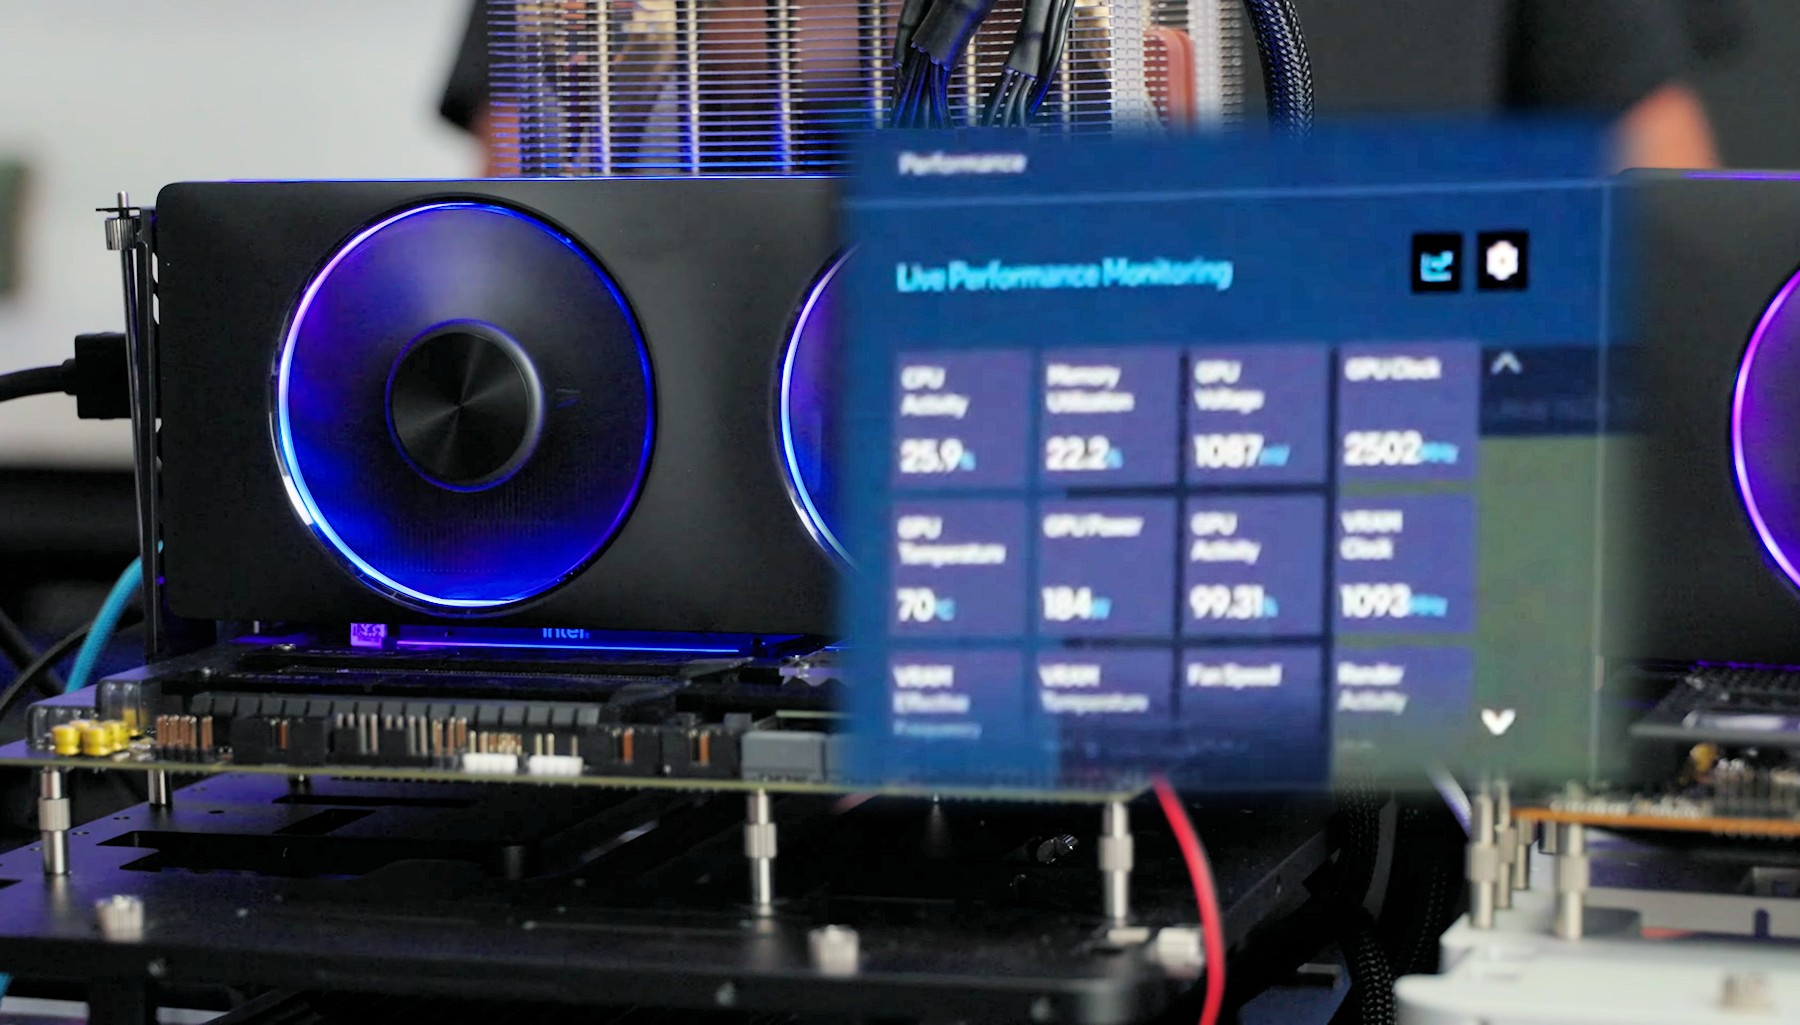 Intel Arc A380 discrete GPU reviews: it's like living in the middle of a  minefield 